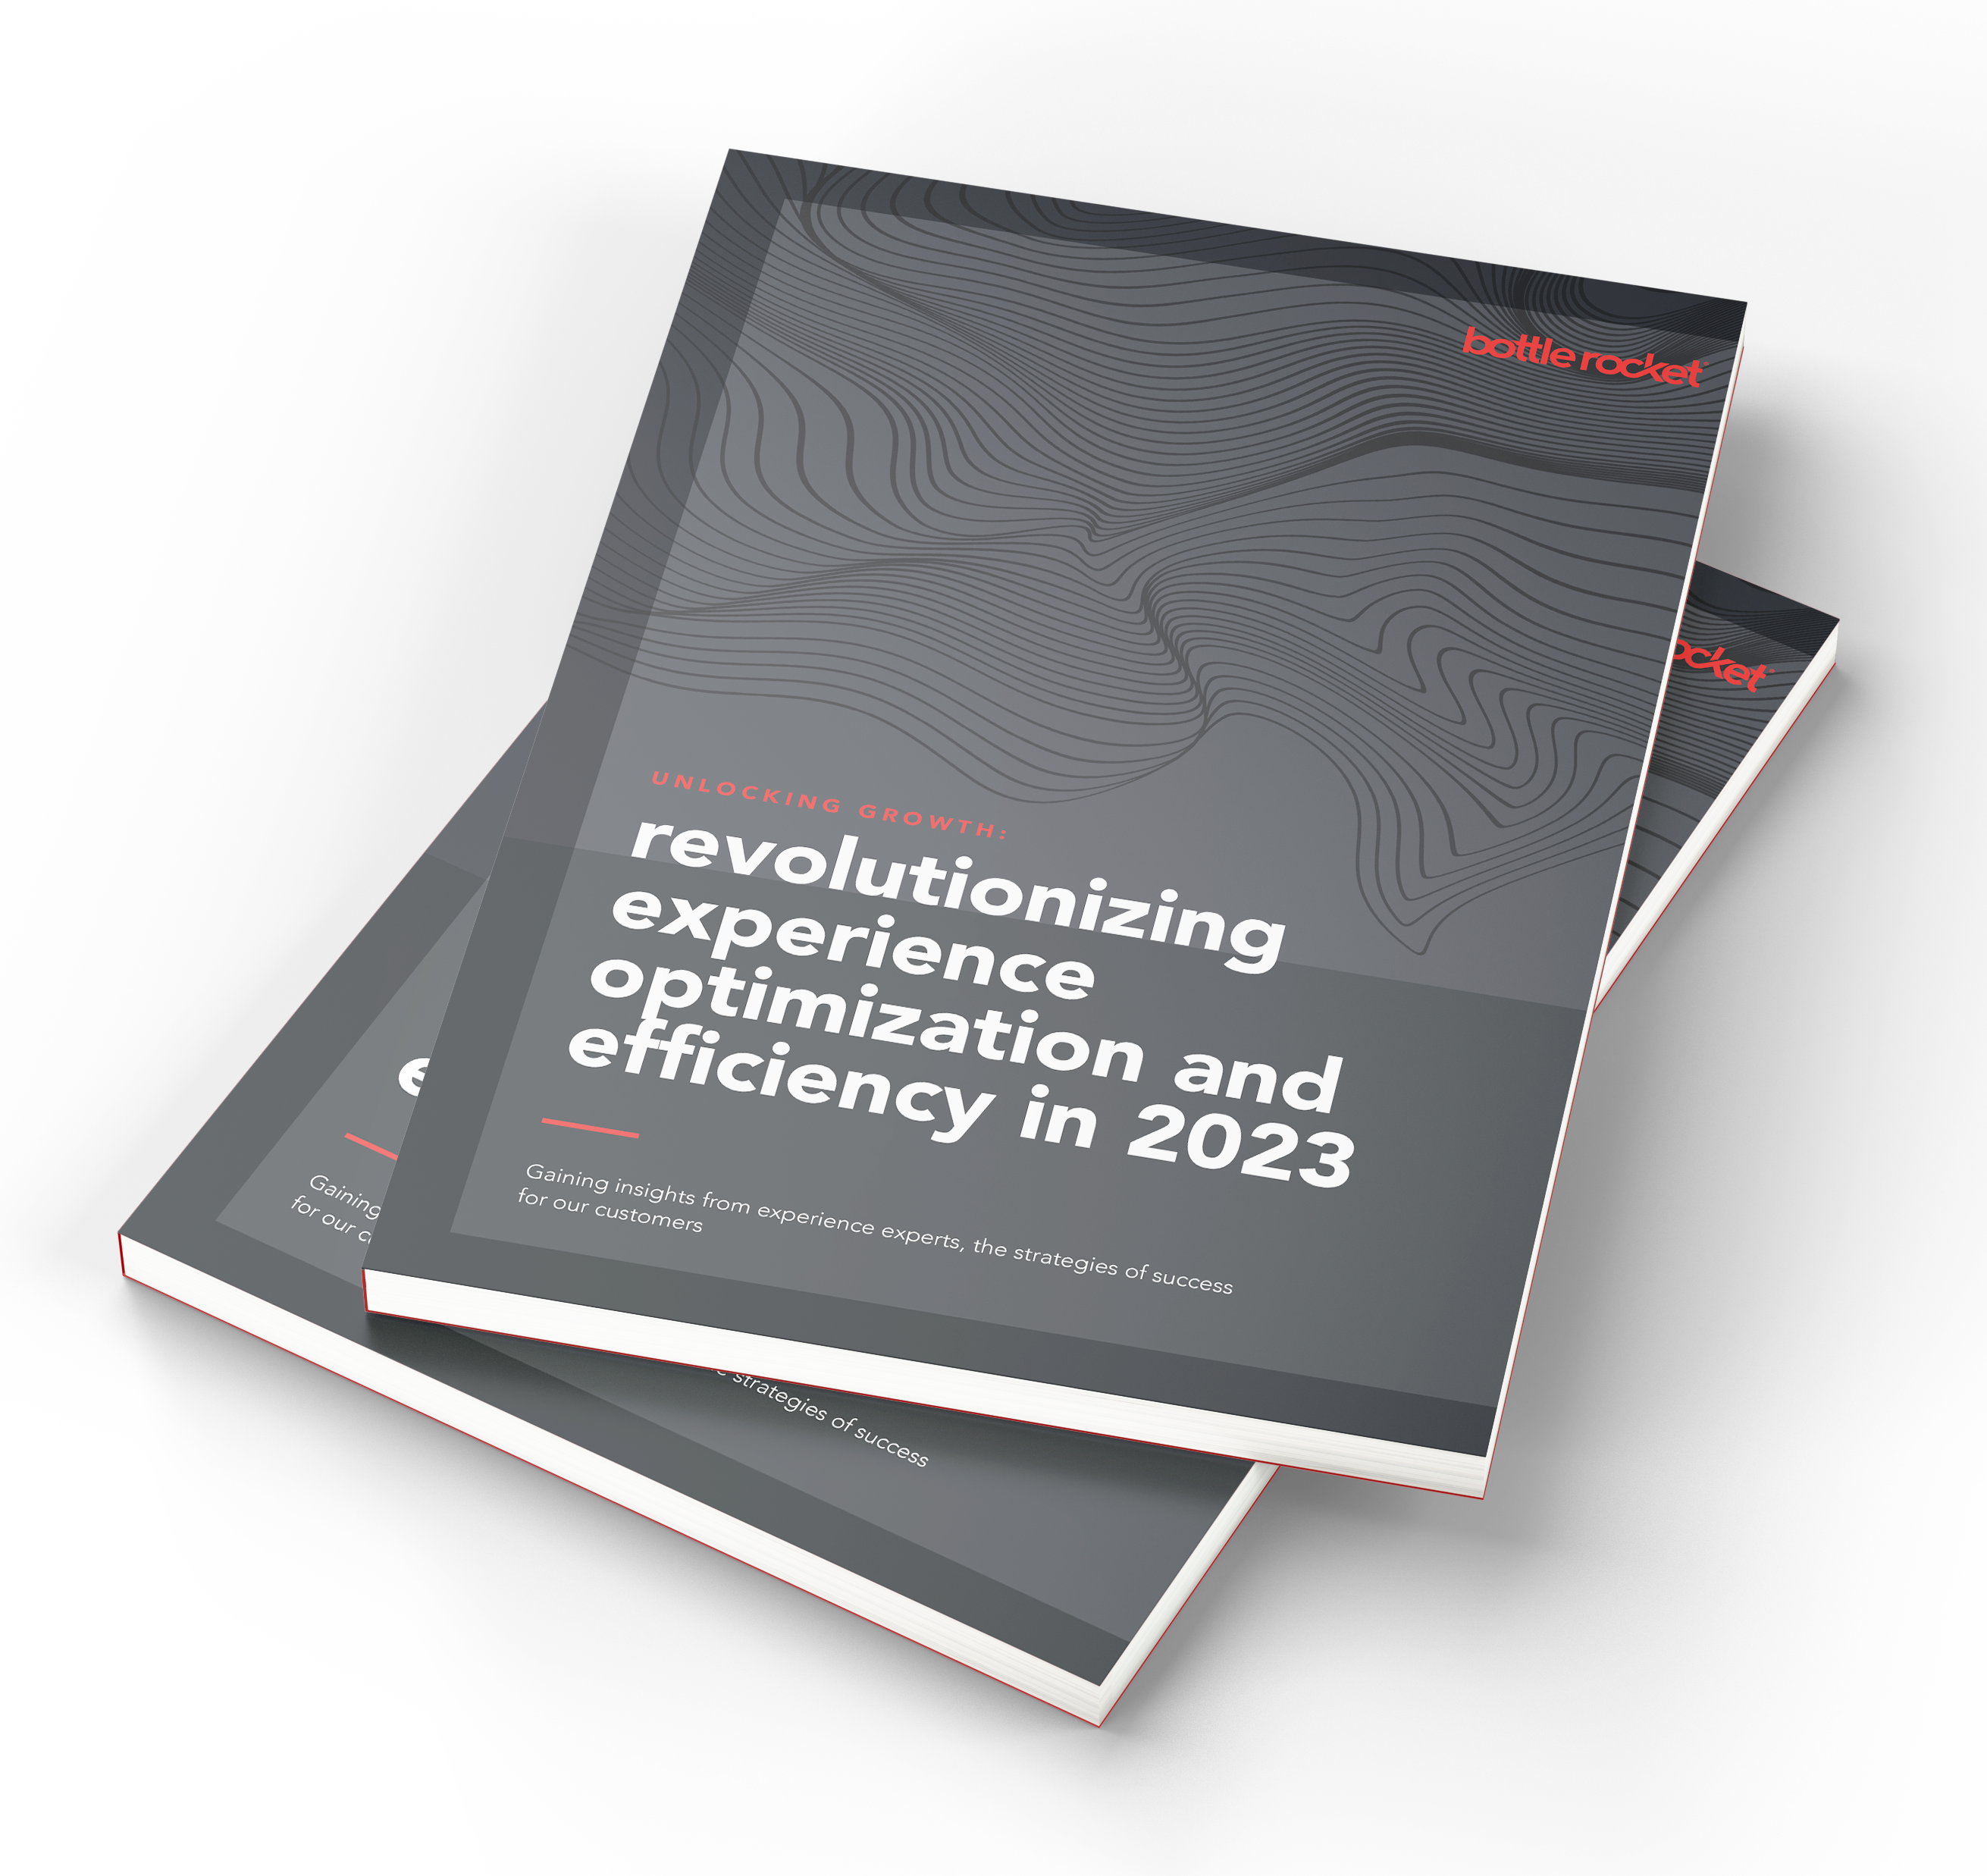 Unlocking Growth: Revolutuionizing experience optimization and efficiency in 2023